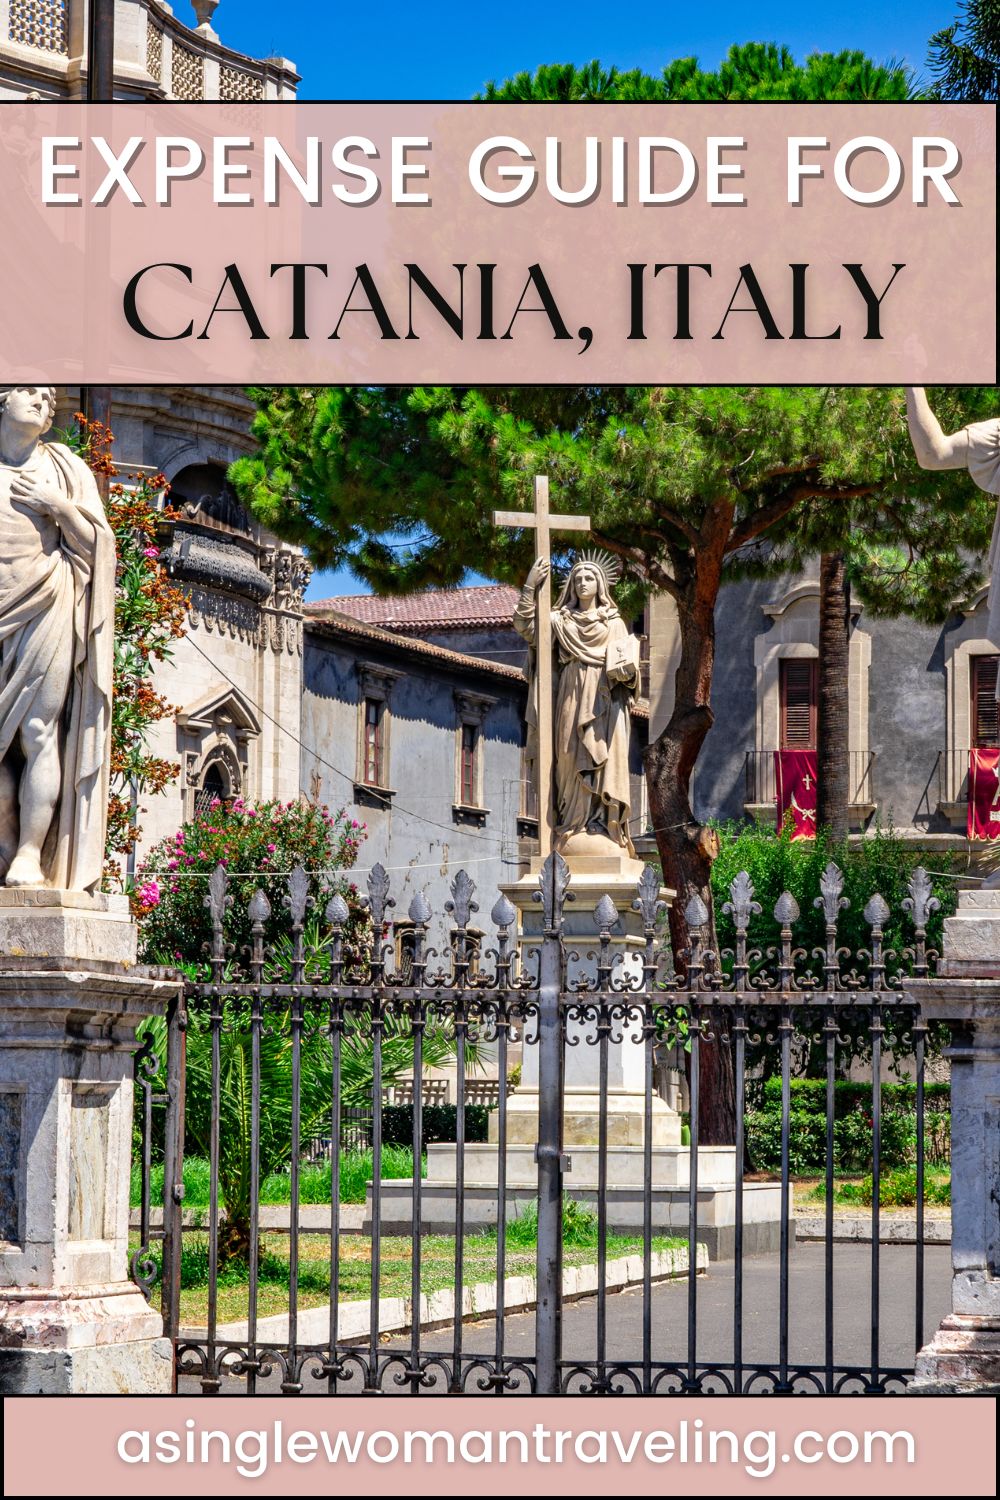 An image showing statues and ornate architecture within a courtyard in Catania, Italy, with the text 'Expense Guide for Catania, Italy' and the URL 'asinglewomantraveling.com' at the bottom.